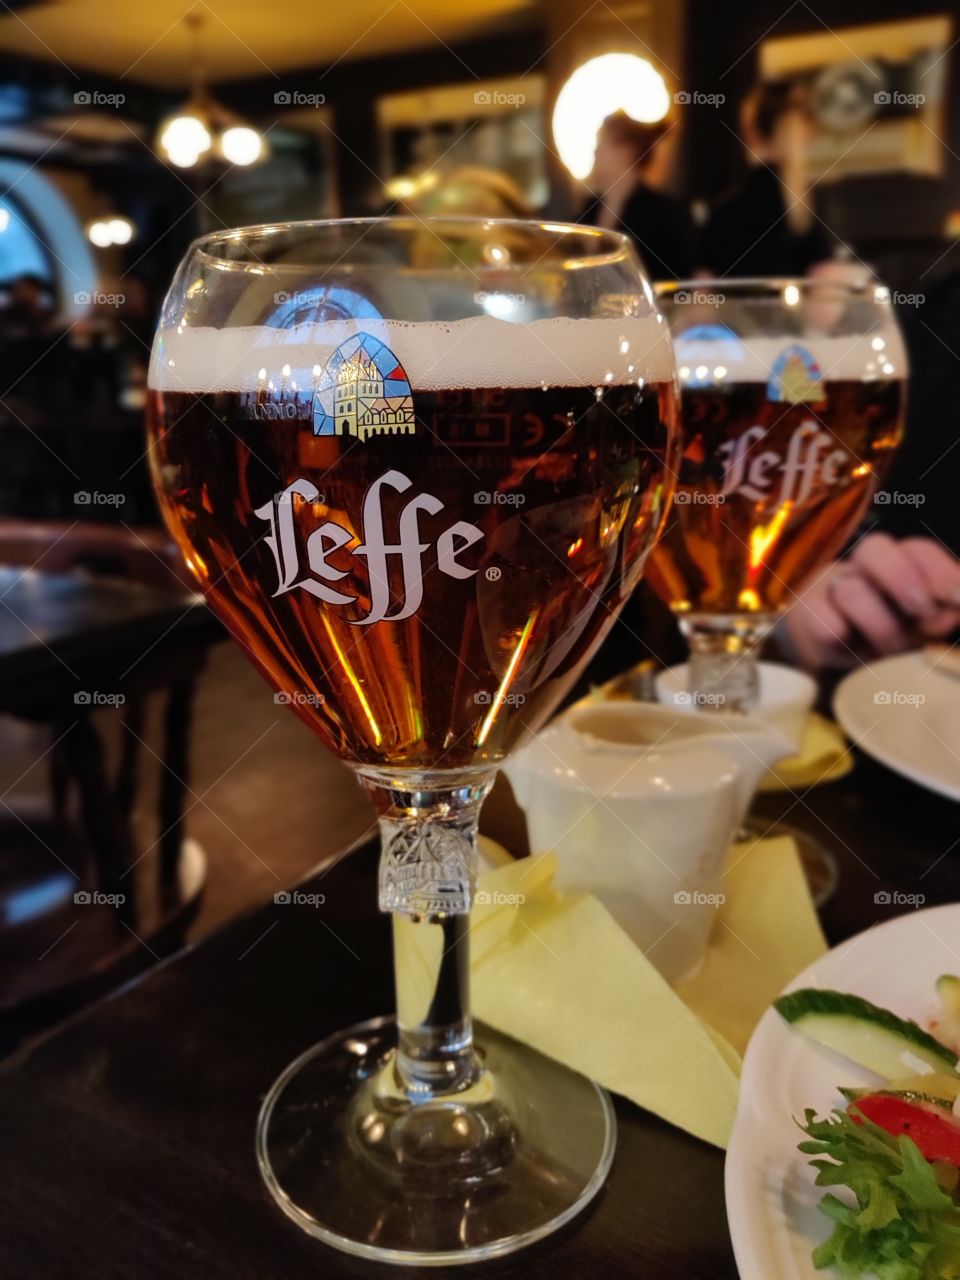 Leffe Blond is an authentic blond abbey beer with a slight hint of bitterness to it.